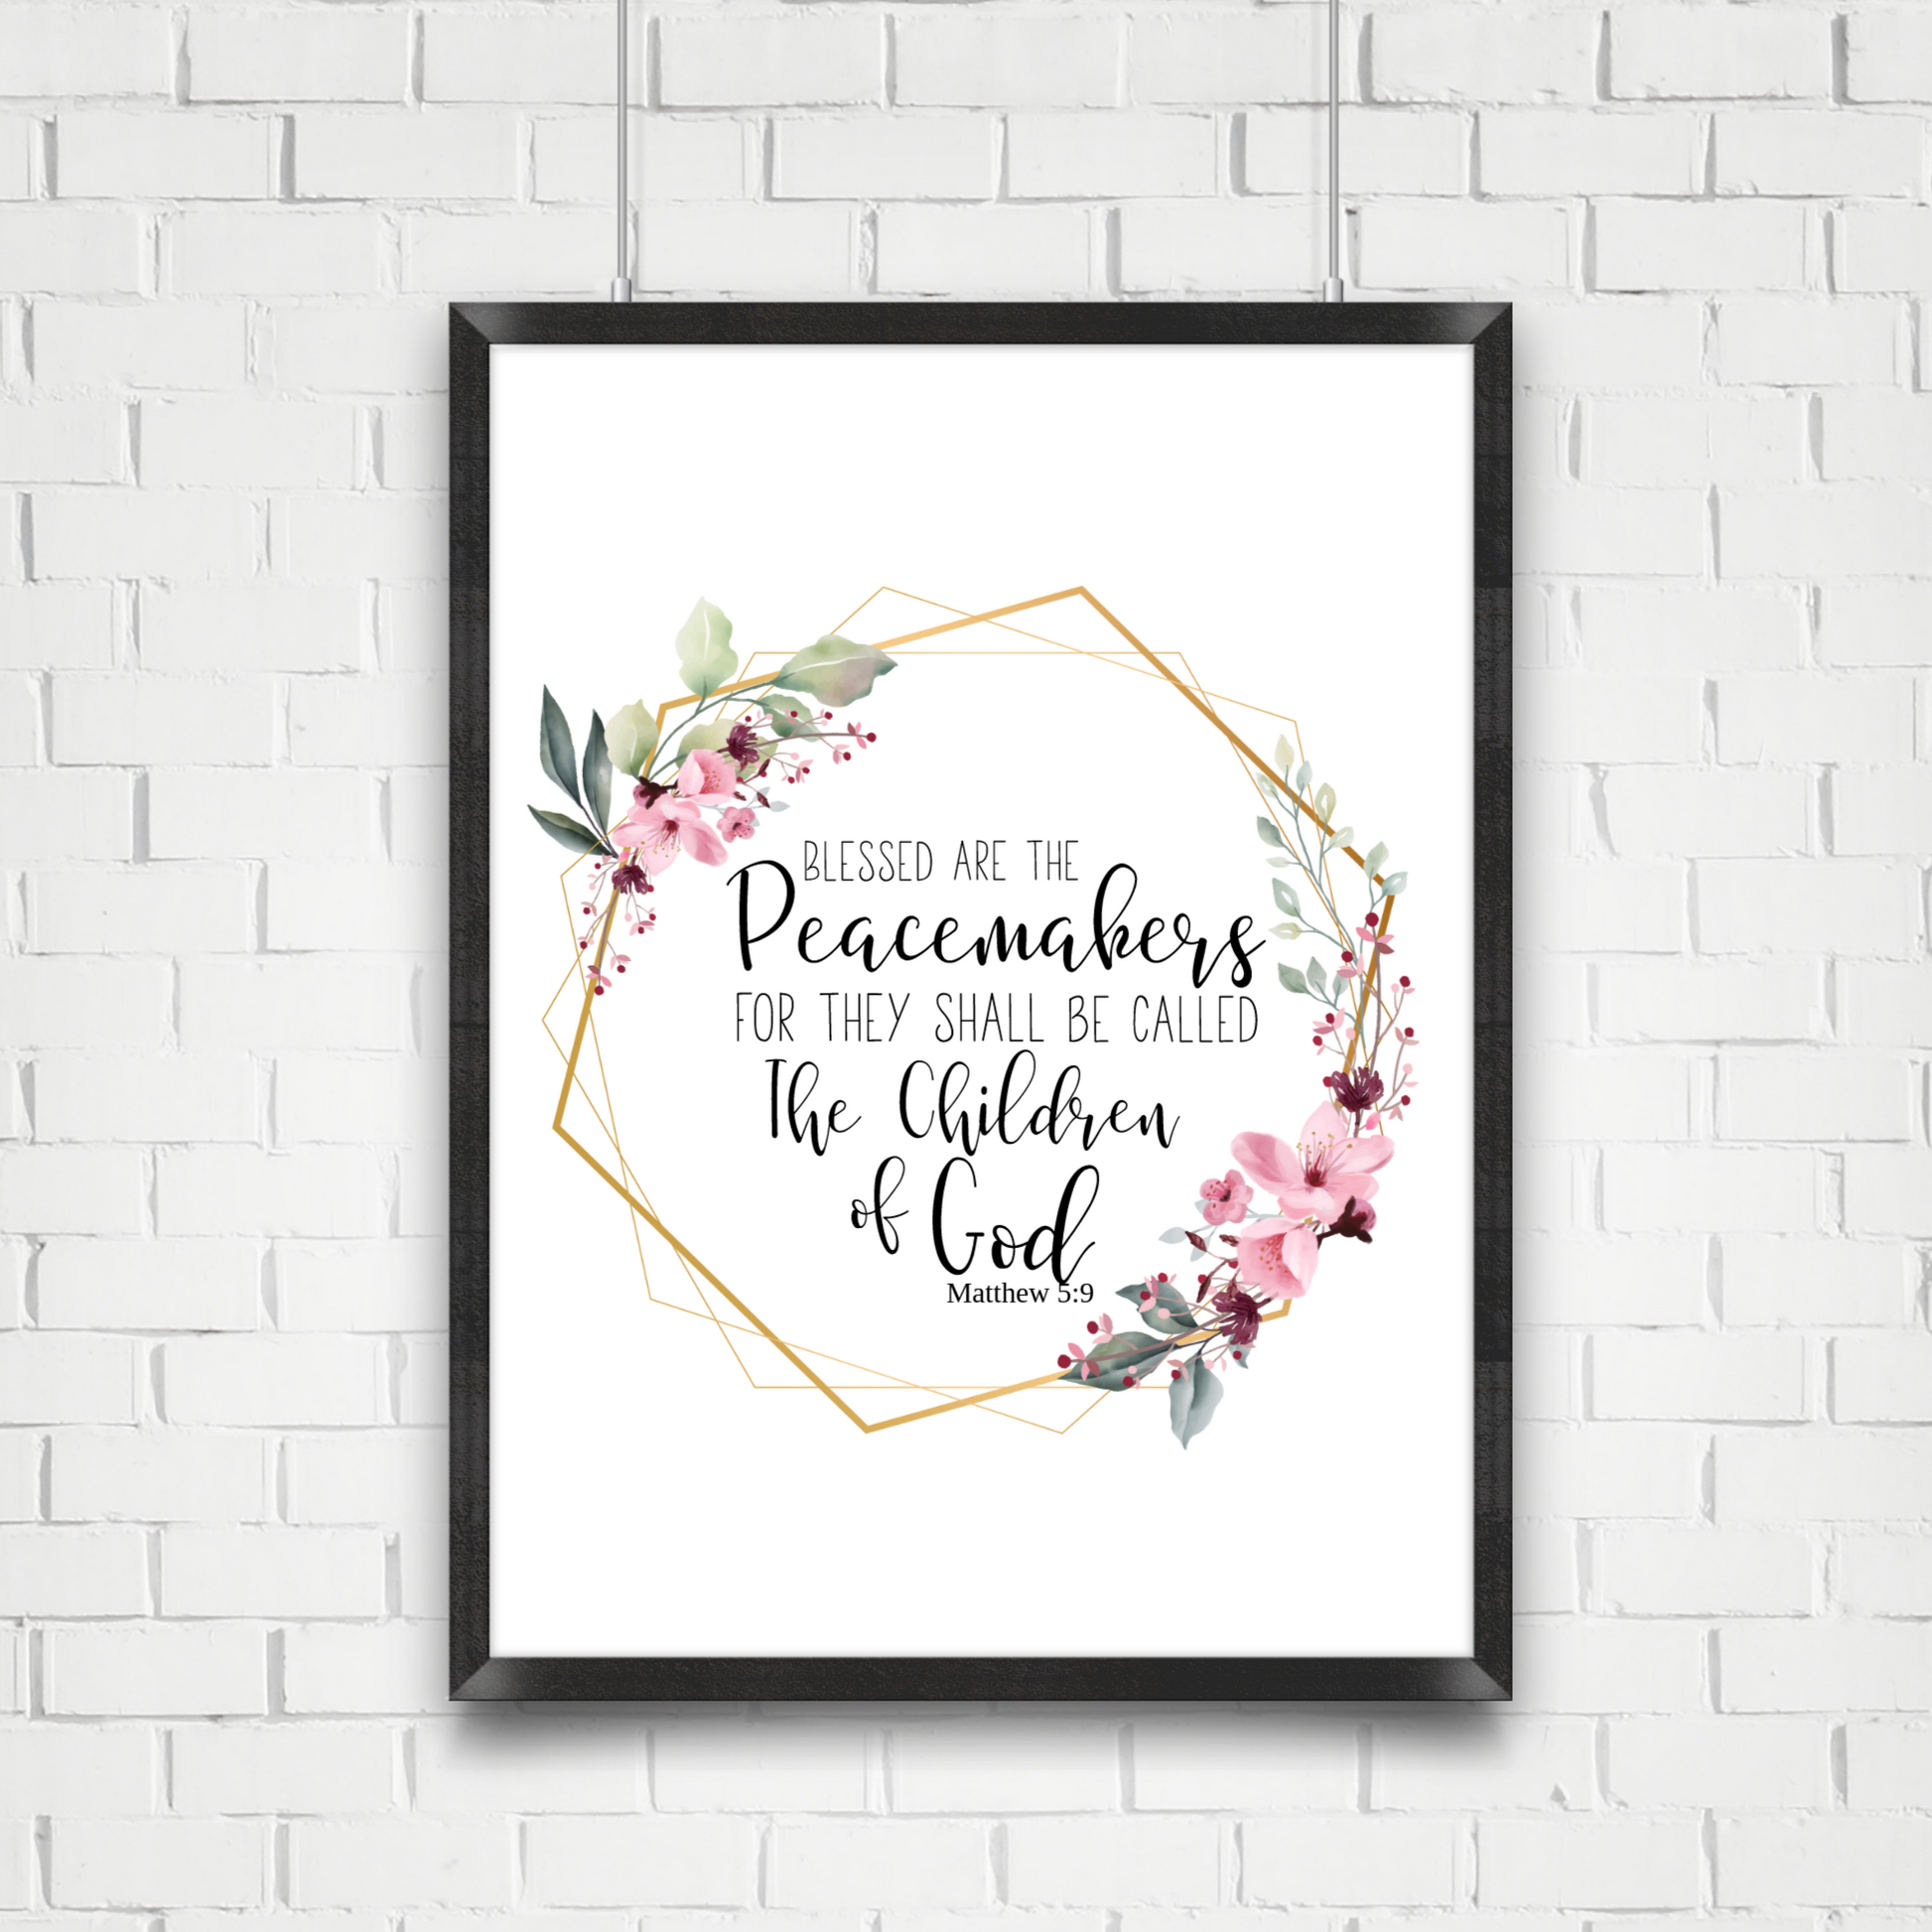 Black frame hanging on a white brick wall. Print in the frame displays a quote from Matthew 5:9 KJV that says Blessed are the peacemakers for they shall be called the Children of God. the quote is surrounded by a gold  geometric frame with pink flowers and greenery. 